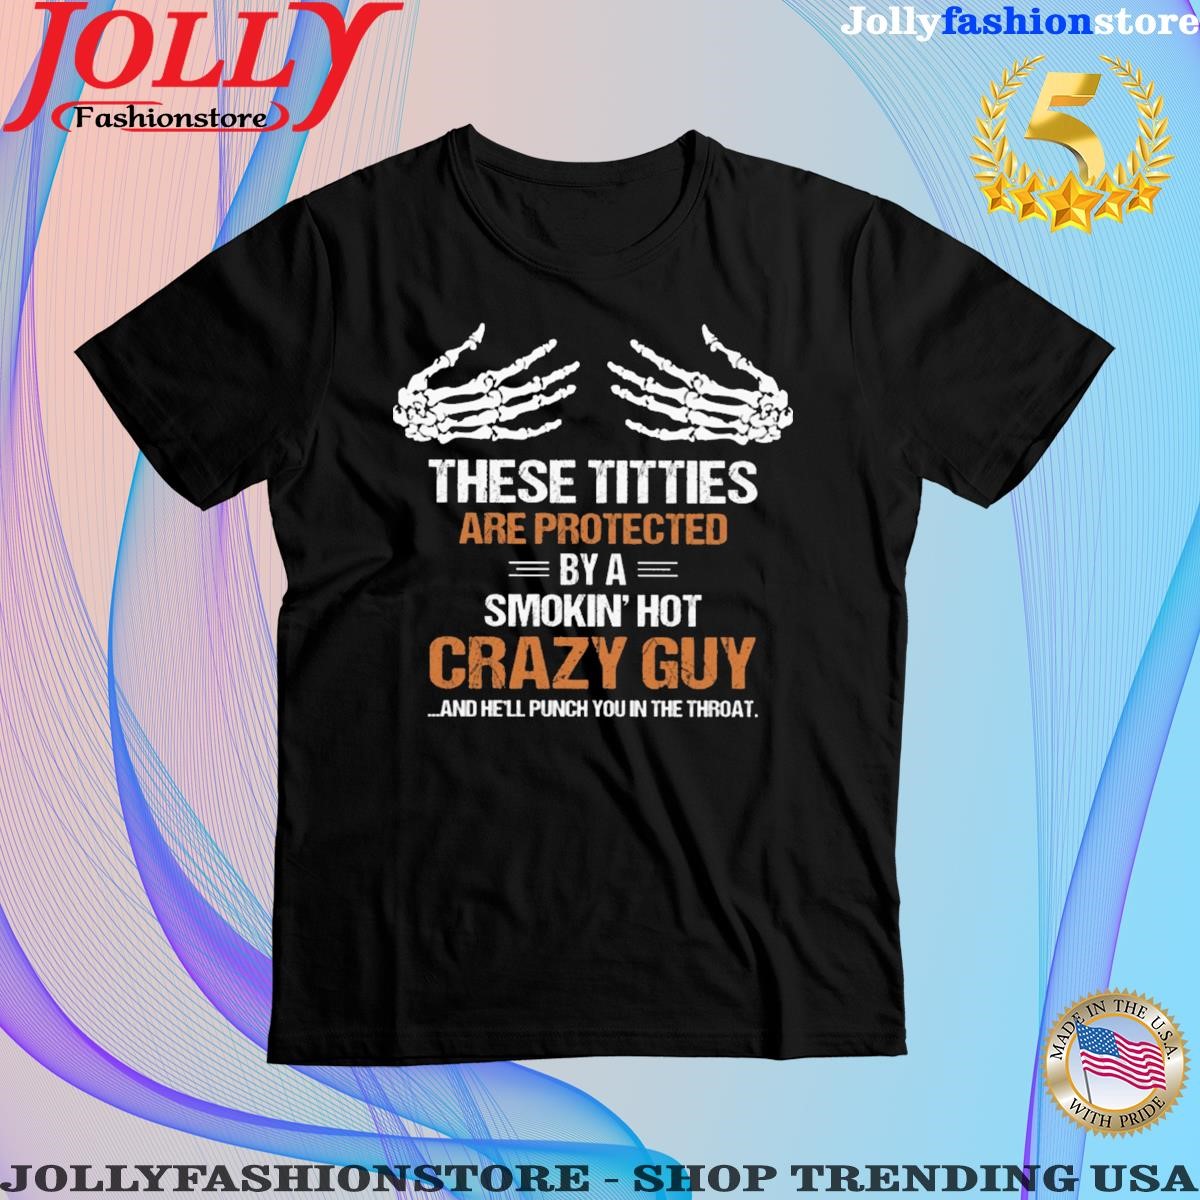 These tities are protected by a smokin hot crazy guy and he'll punch you in the throat shirt